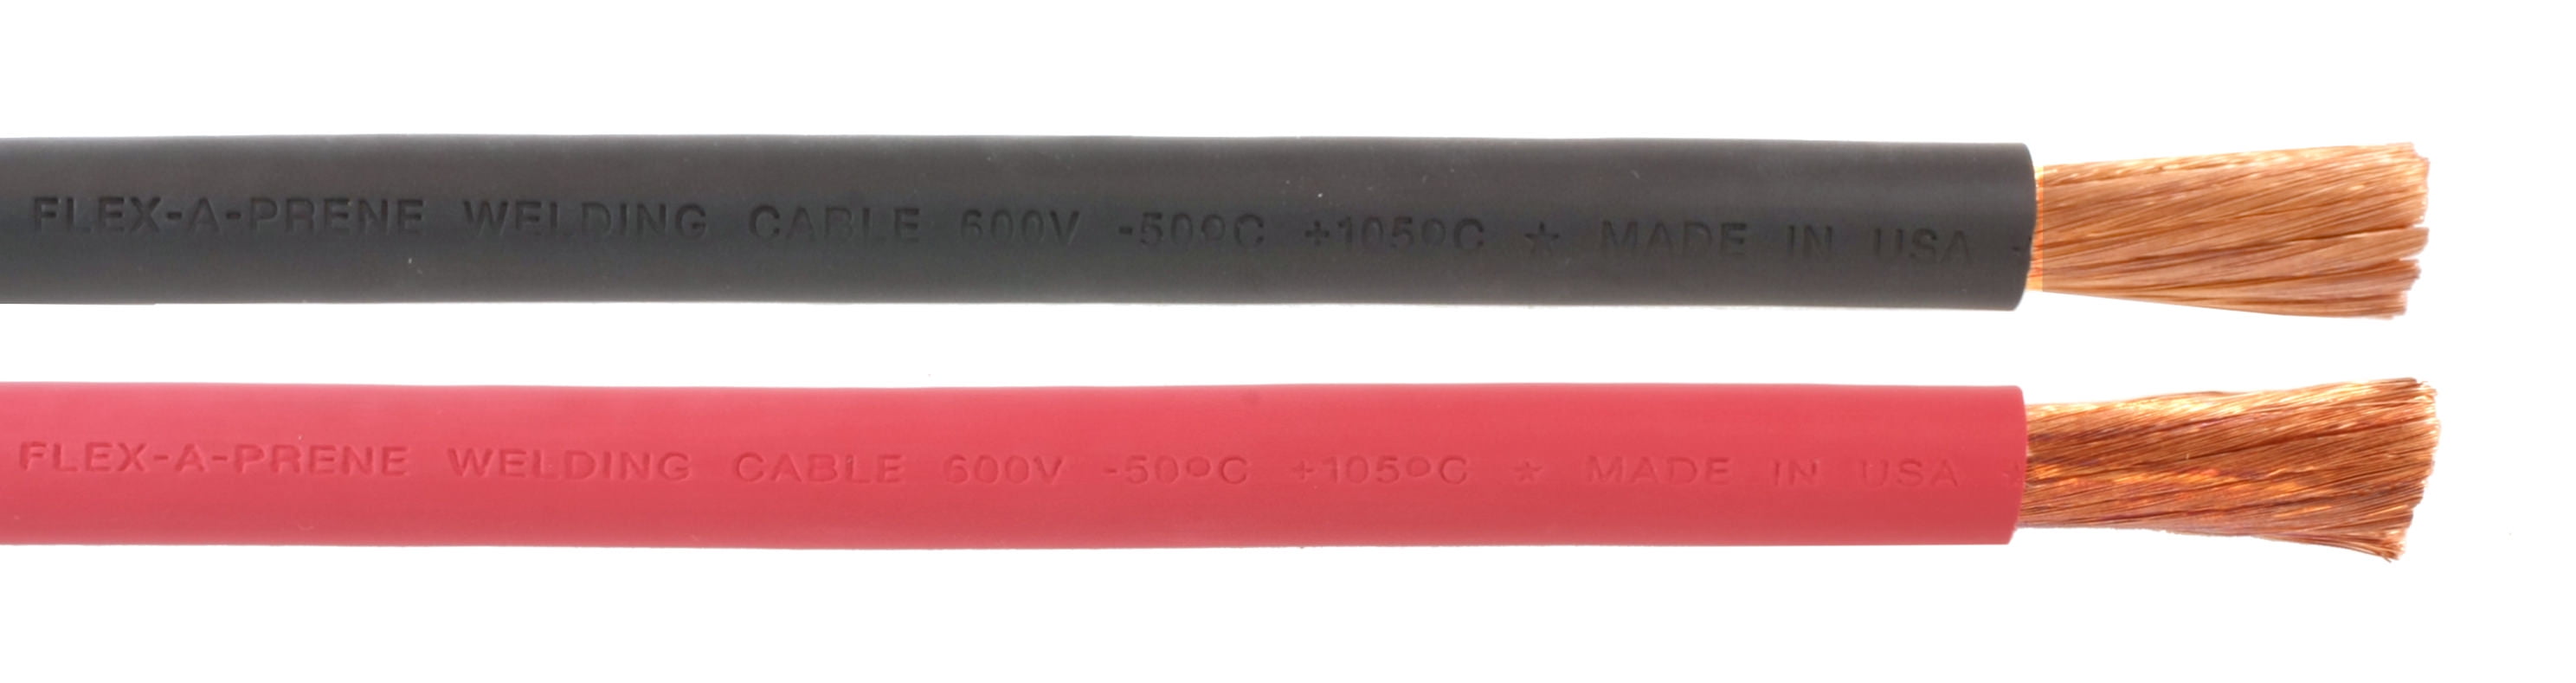 Black & Red - Welding/Battery Cable 2/0 Gauge AWG 20 FEET OF EACH COLOR 